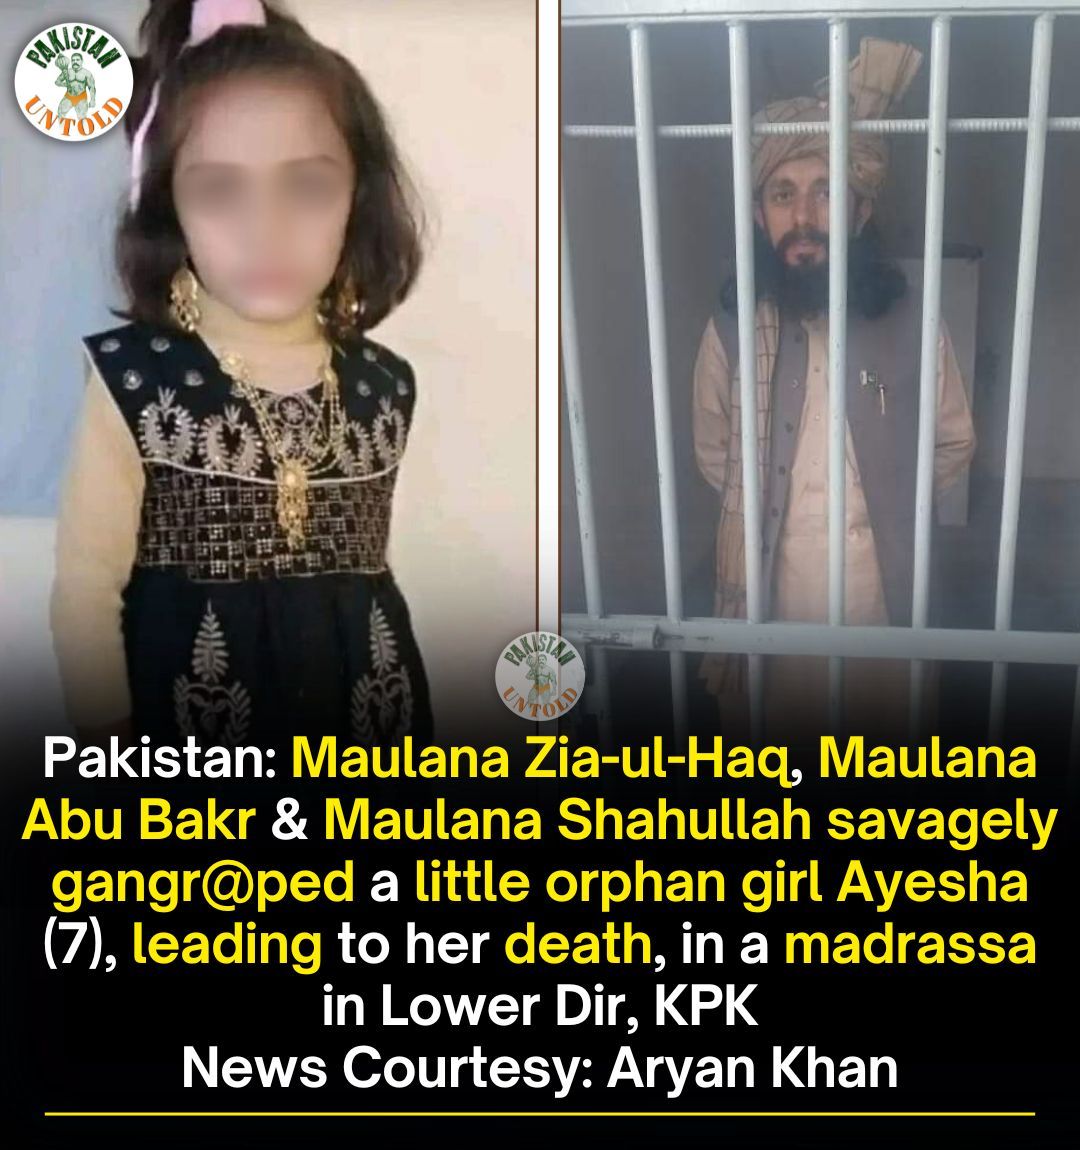 7 yr old orphan girl Brutally gangr@ped by three Pak Molvis leading her to death. They force the world to observe a useless Islamophobia day but themselves hate little kids, minorities & women so much.